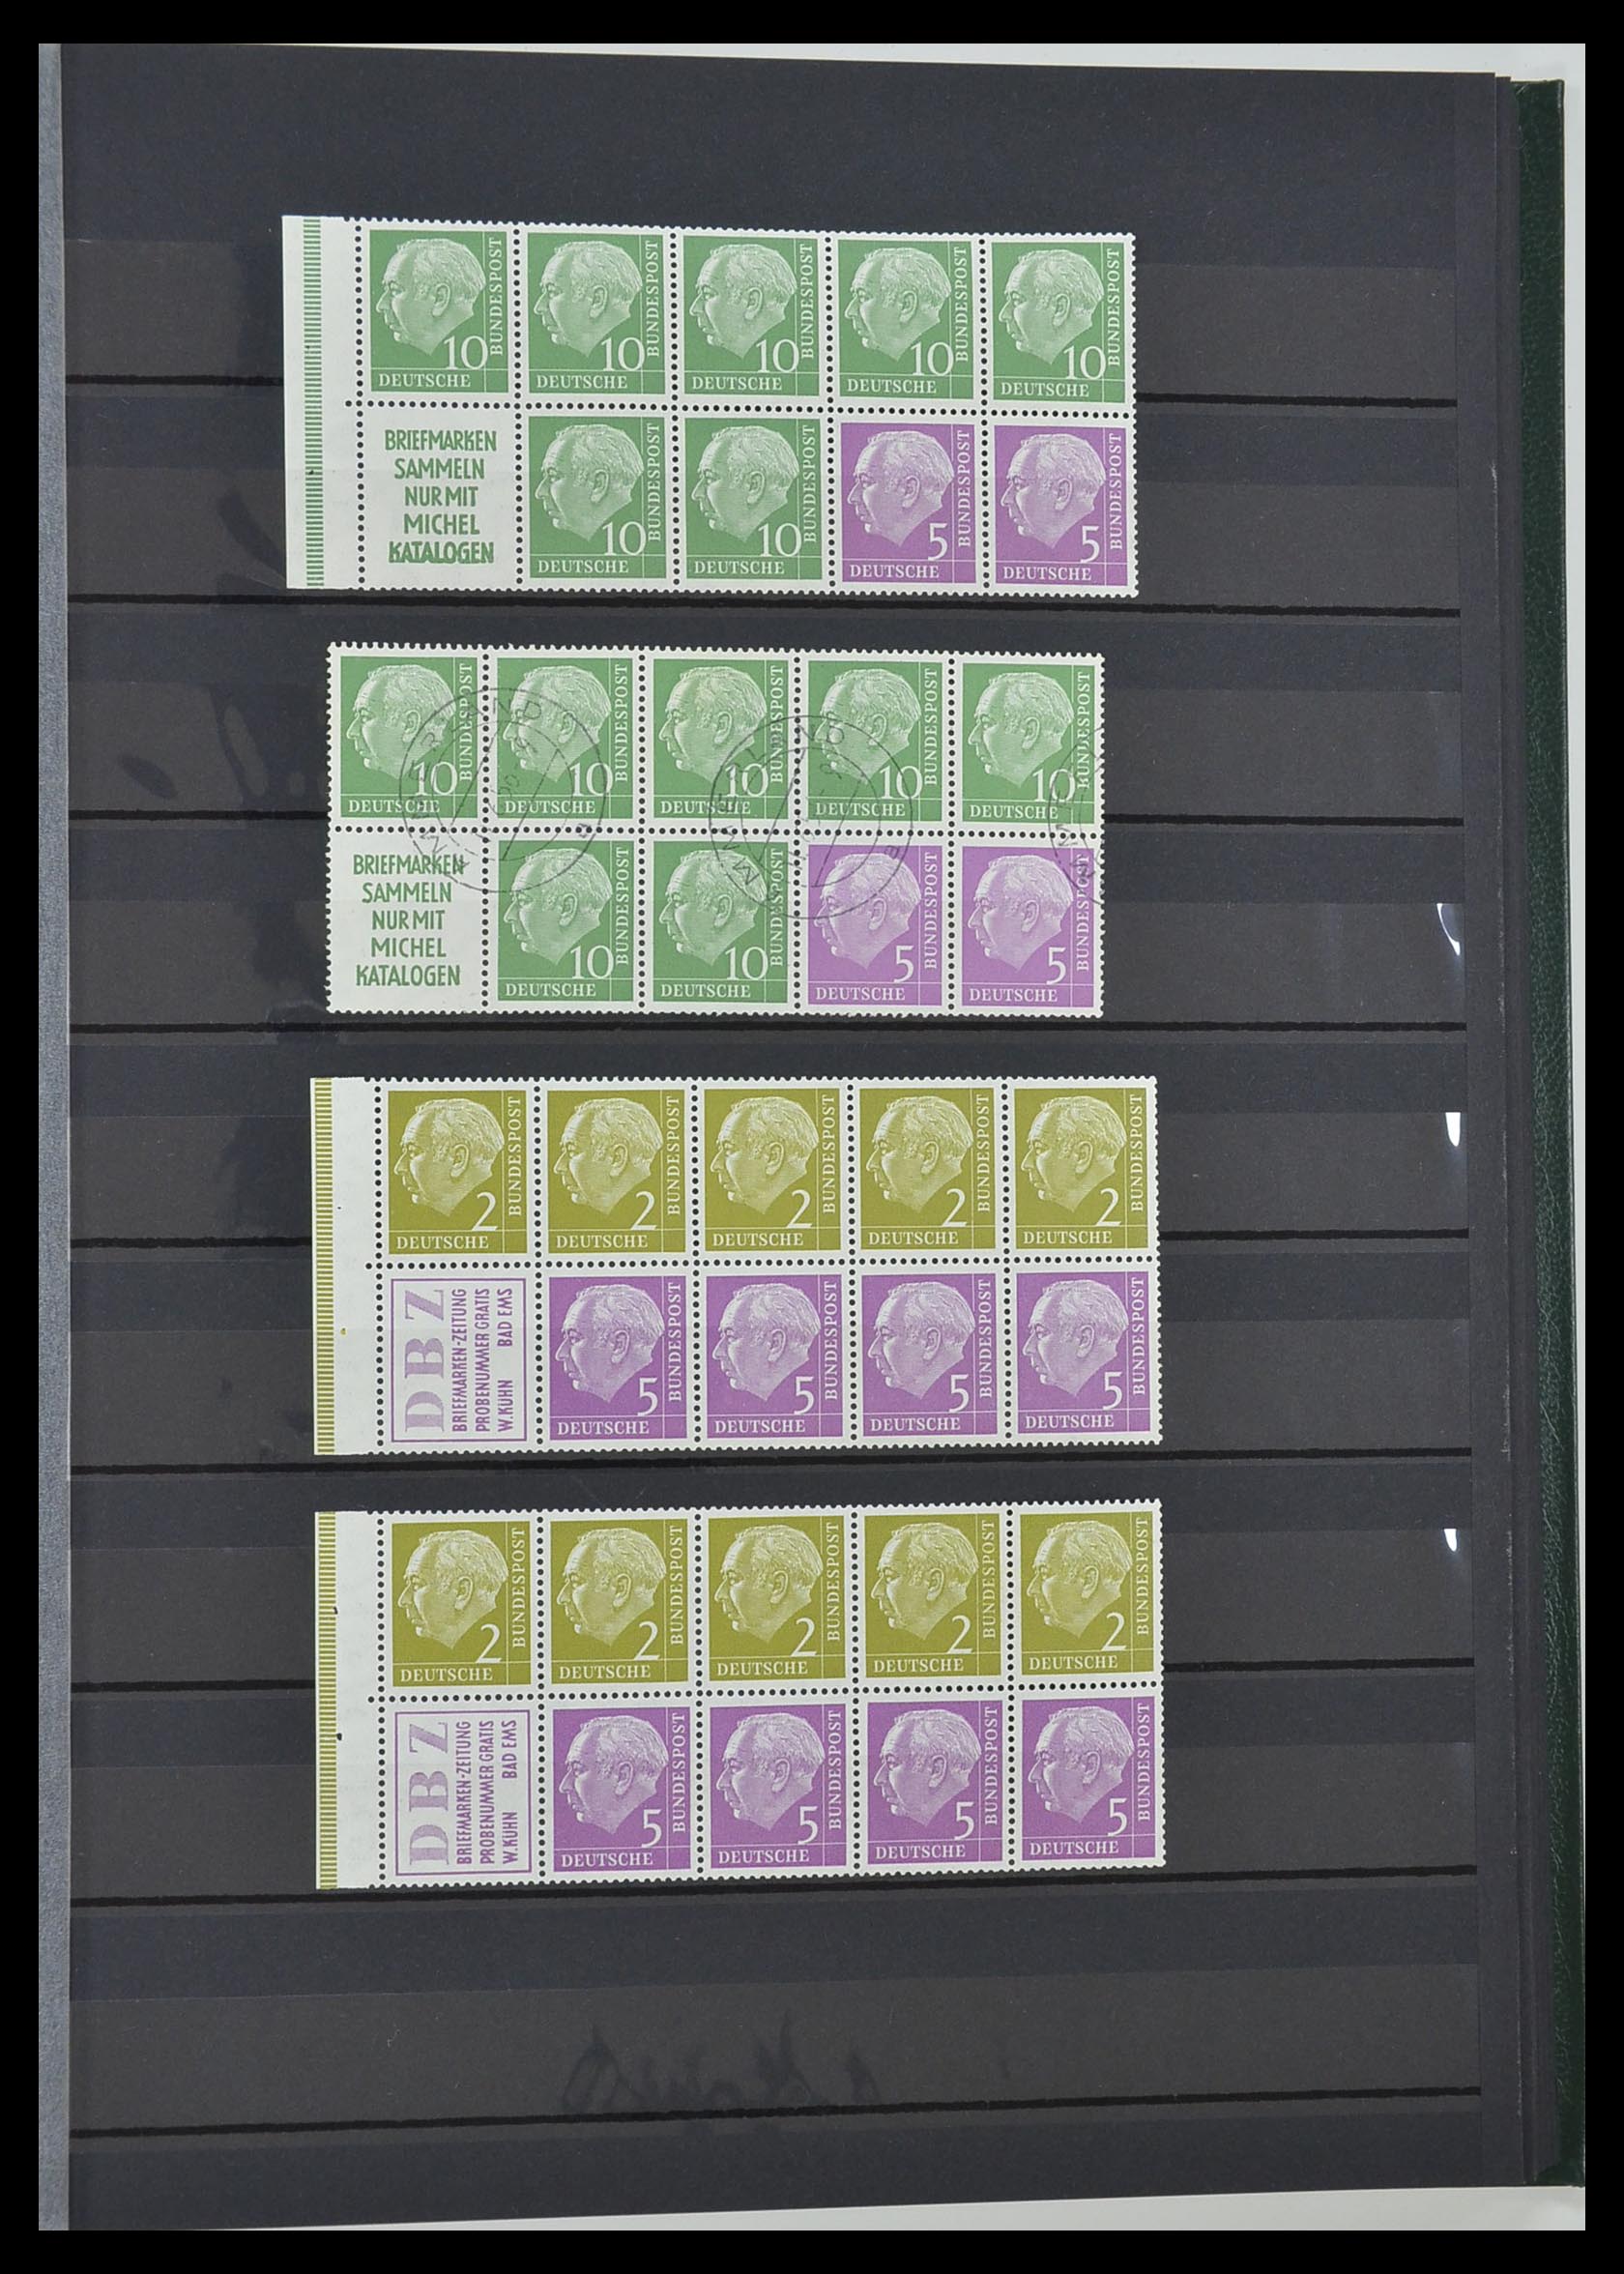 33275 033 - Stamp collection 33275 Bundespost combinations 1951-1960.